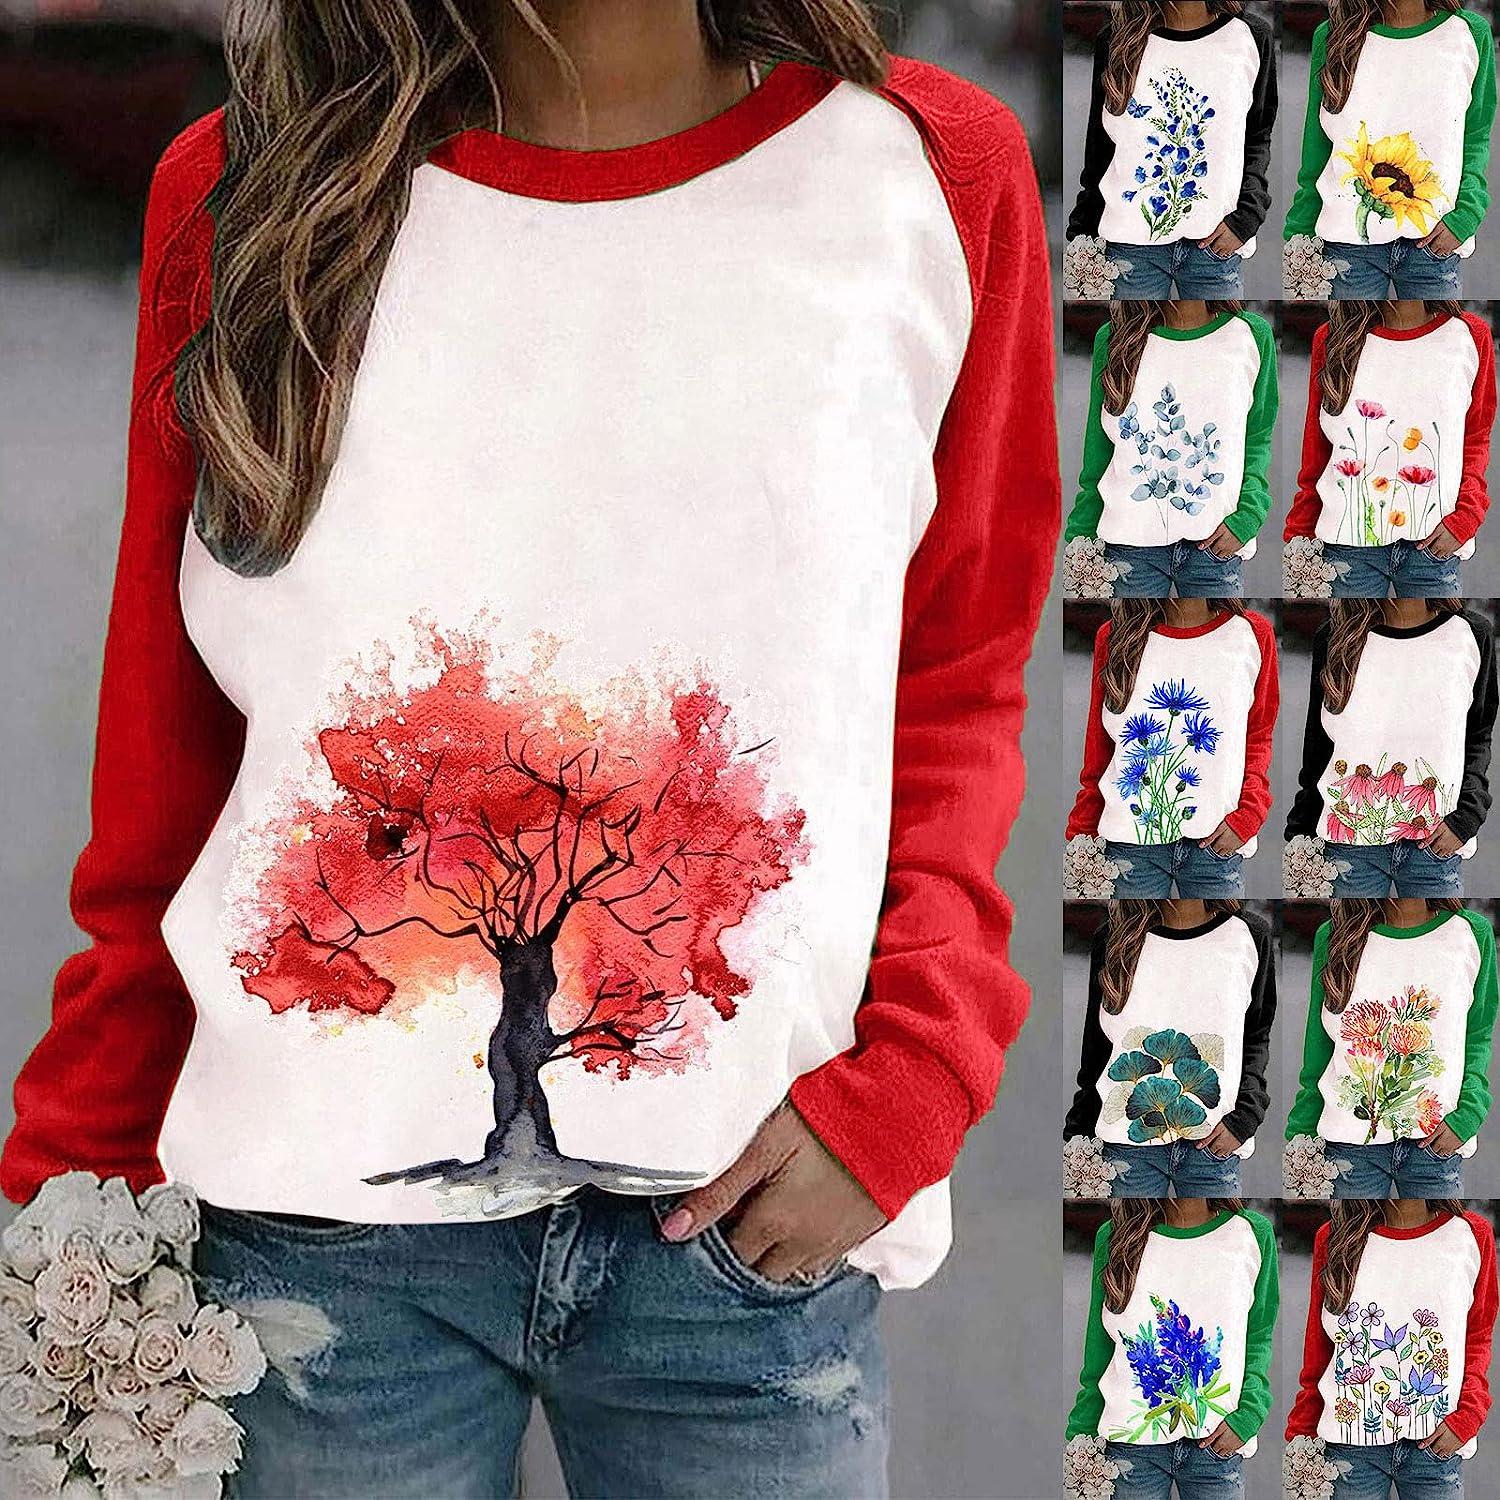 Fashion Hollow Out T-shirt Sequin Top Long Sleeve Tee Shiny Shirts Women  One Side Cold Shoulder Tunic Tops Casual Red Blouse